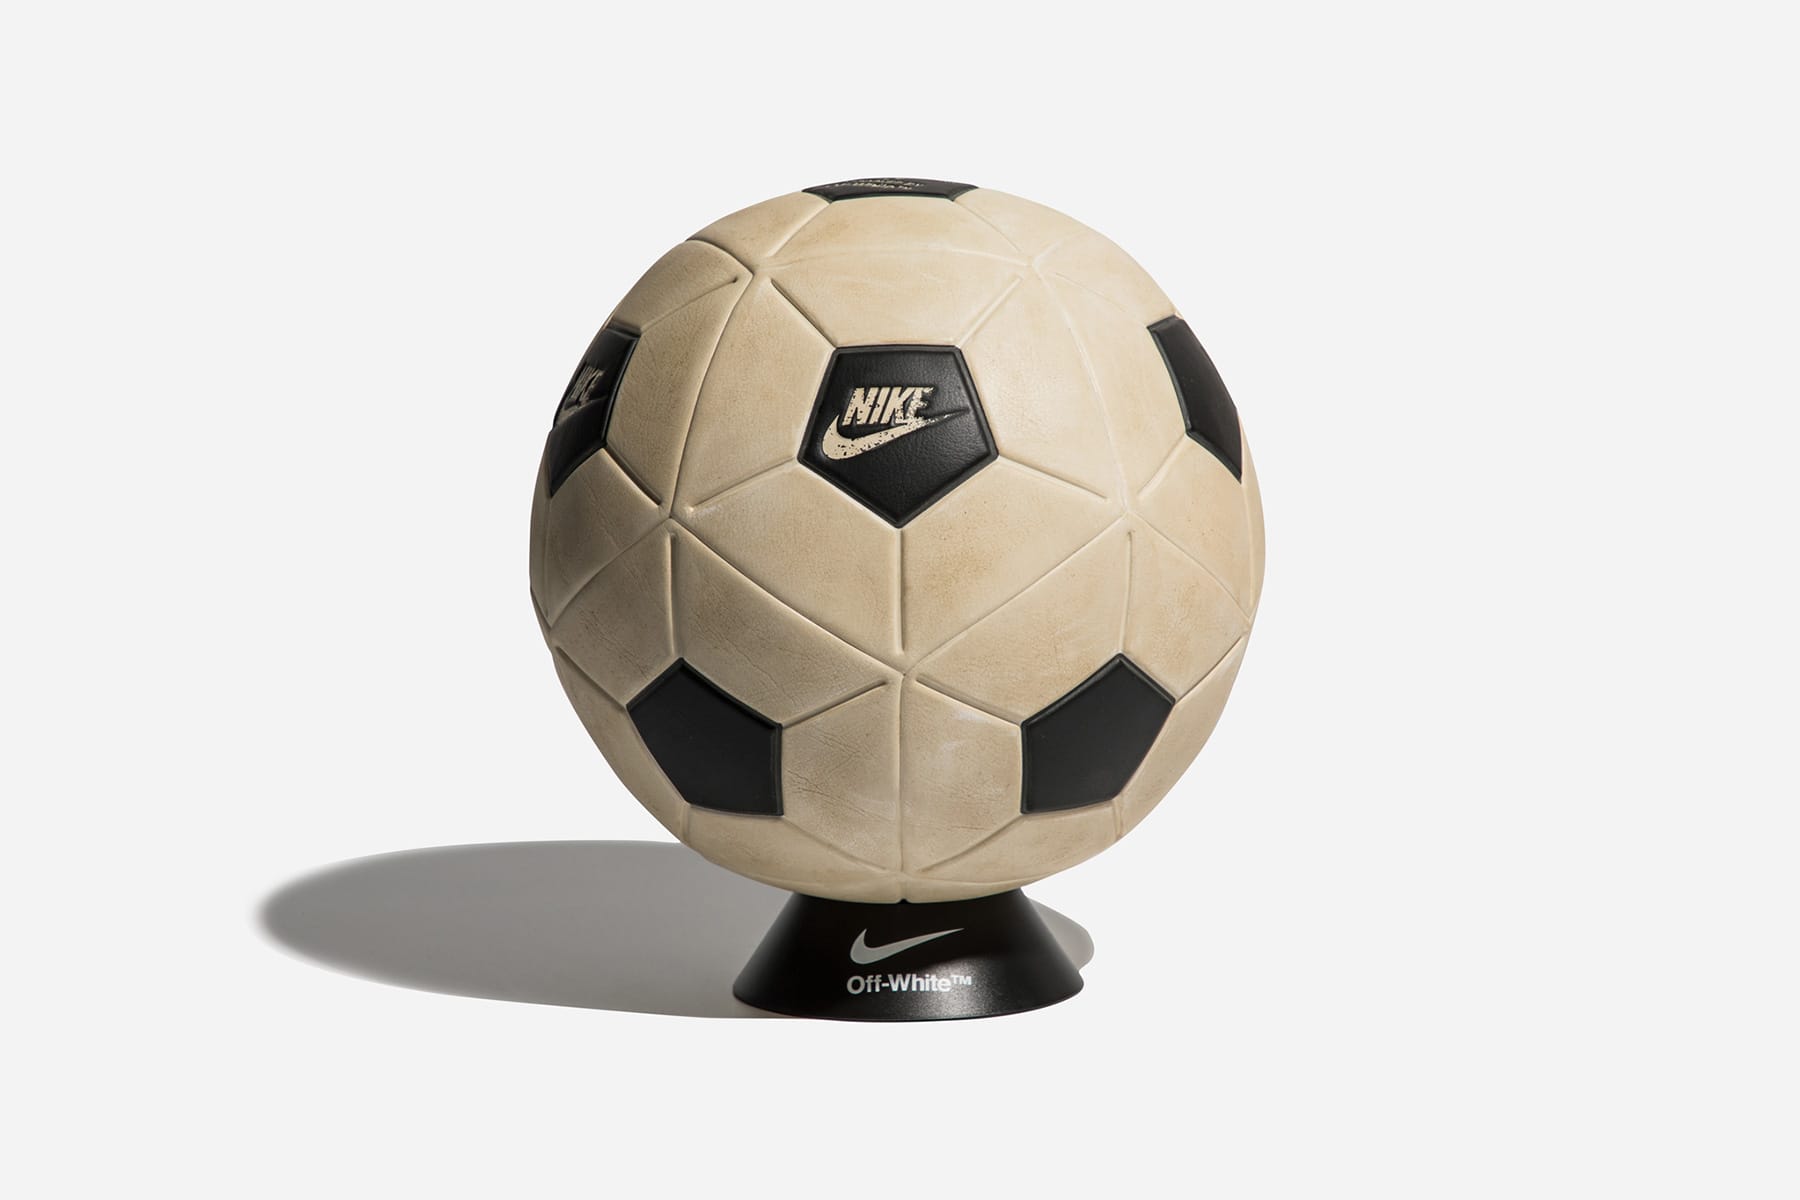 Nike x Off-White™ Magia Match Ball Closer Look | HYPEBEAST